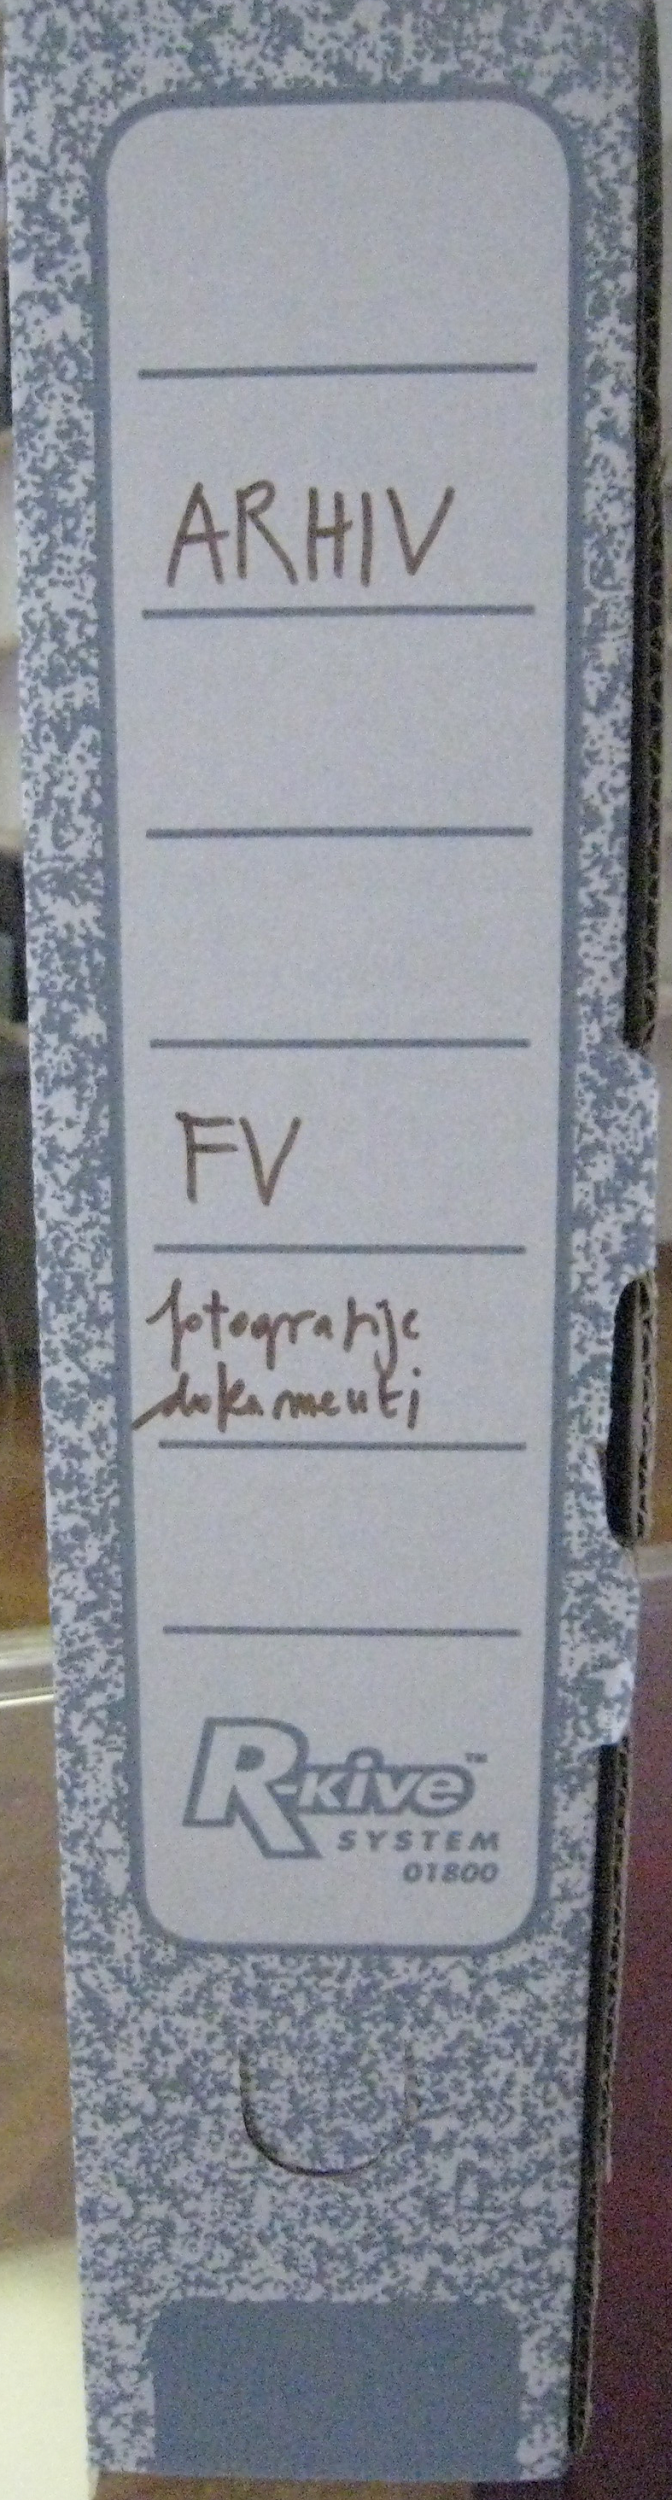 A box with FV 112/15 group archival material: photos, documents at MGLC.